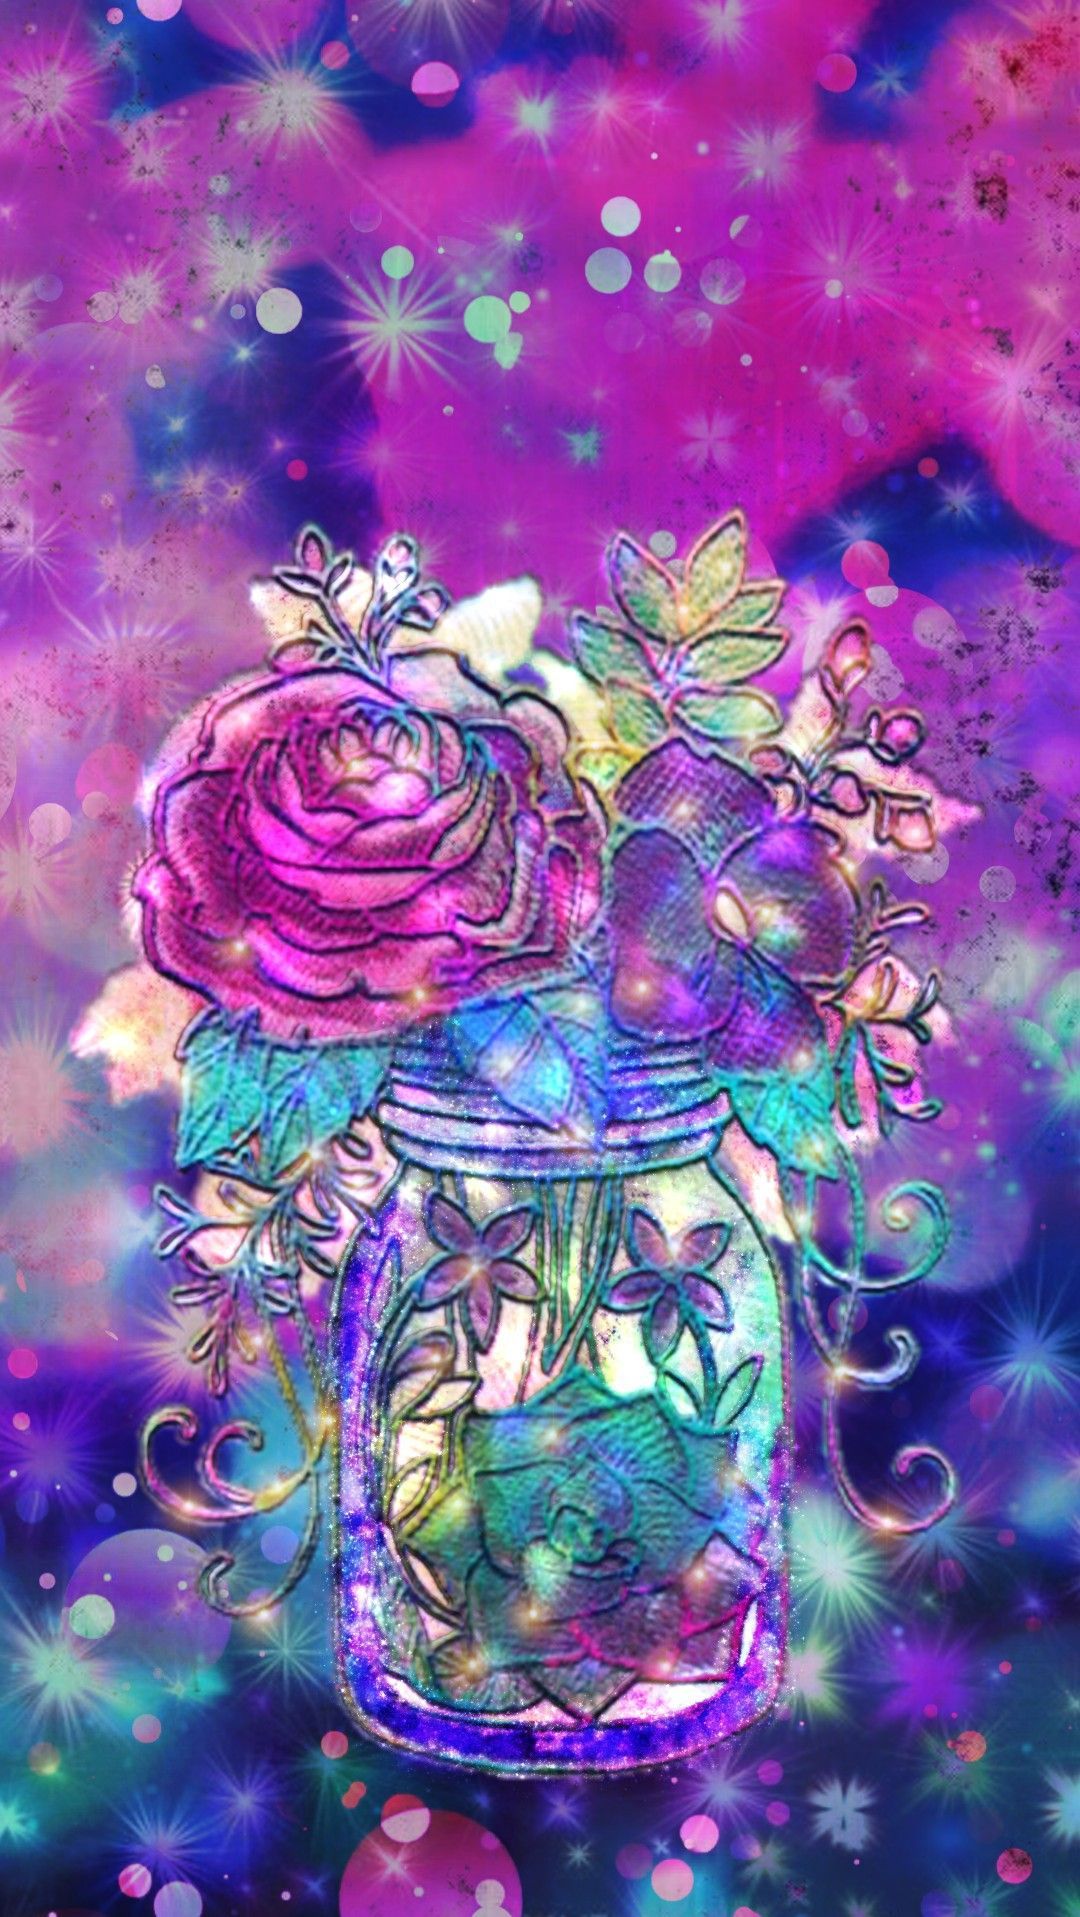 Twinkling Flower Jar, made by me #purple #sparkly #wallpaper #background # glitter #colorful. Cool background wallpaper, Glitter wallpaper, Glitter background